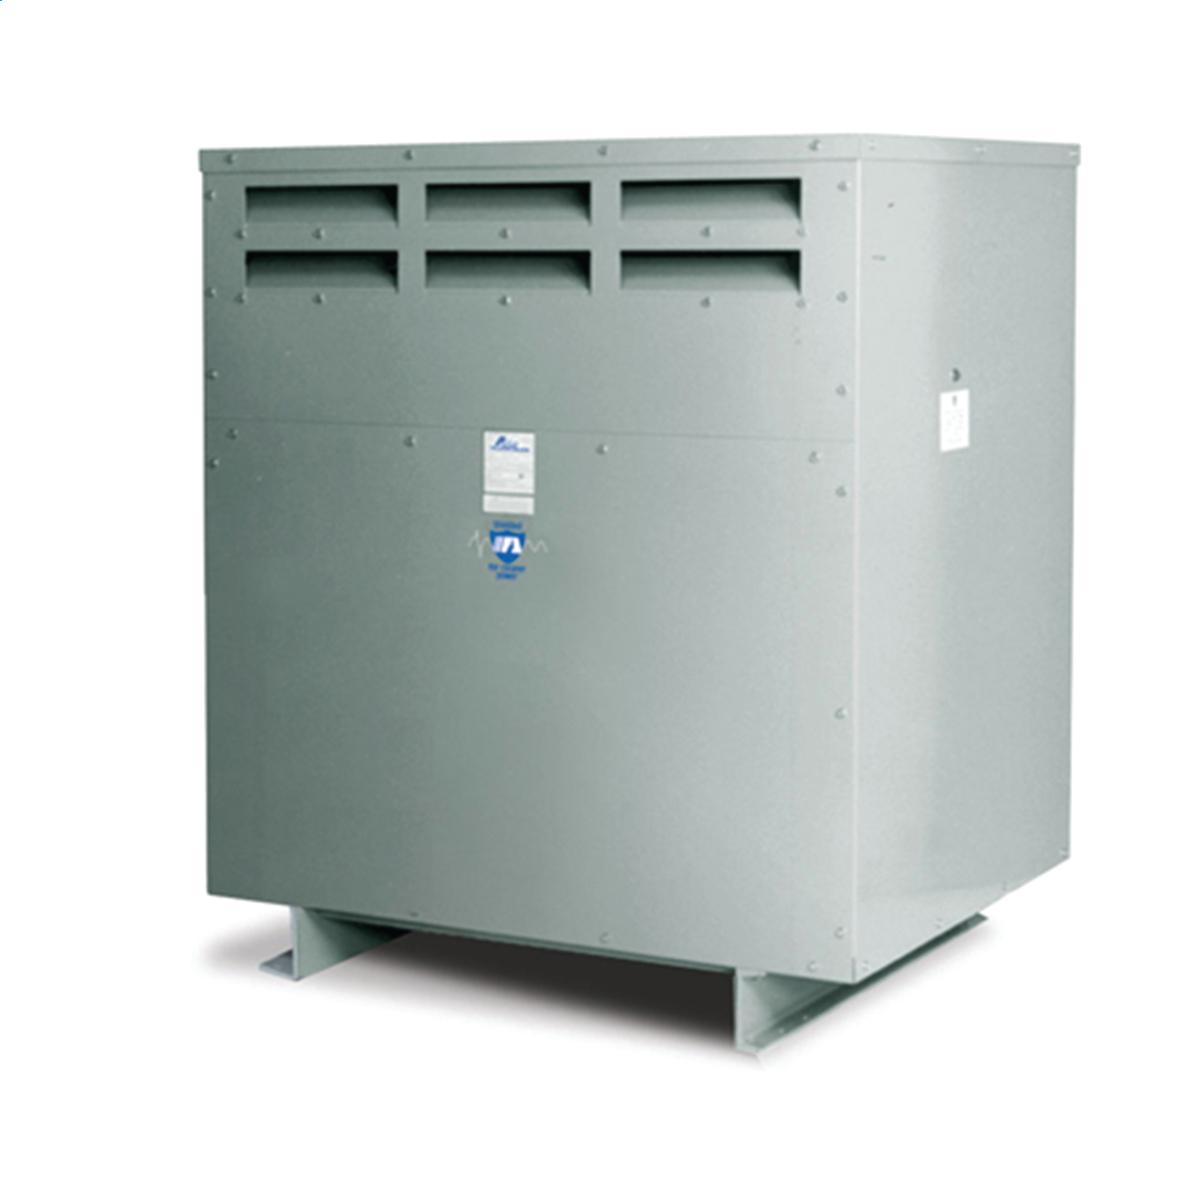 Hubbell WI001M10 Medium Voltage Transformer - Three Phase, 2400Δ - 208Y//120V, 1000kVA  ; Lower operating cost over Liquid-filled ; No additional fireproofing or venting ; Long life expectancy ; Smaller, lighter easy to maintain